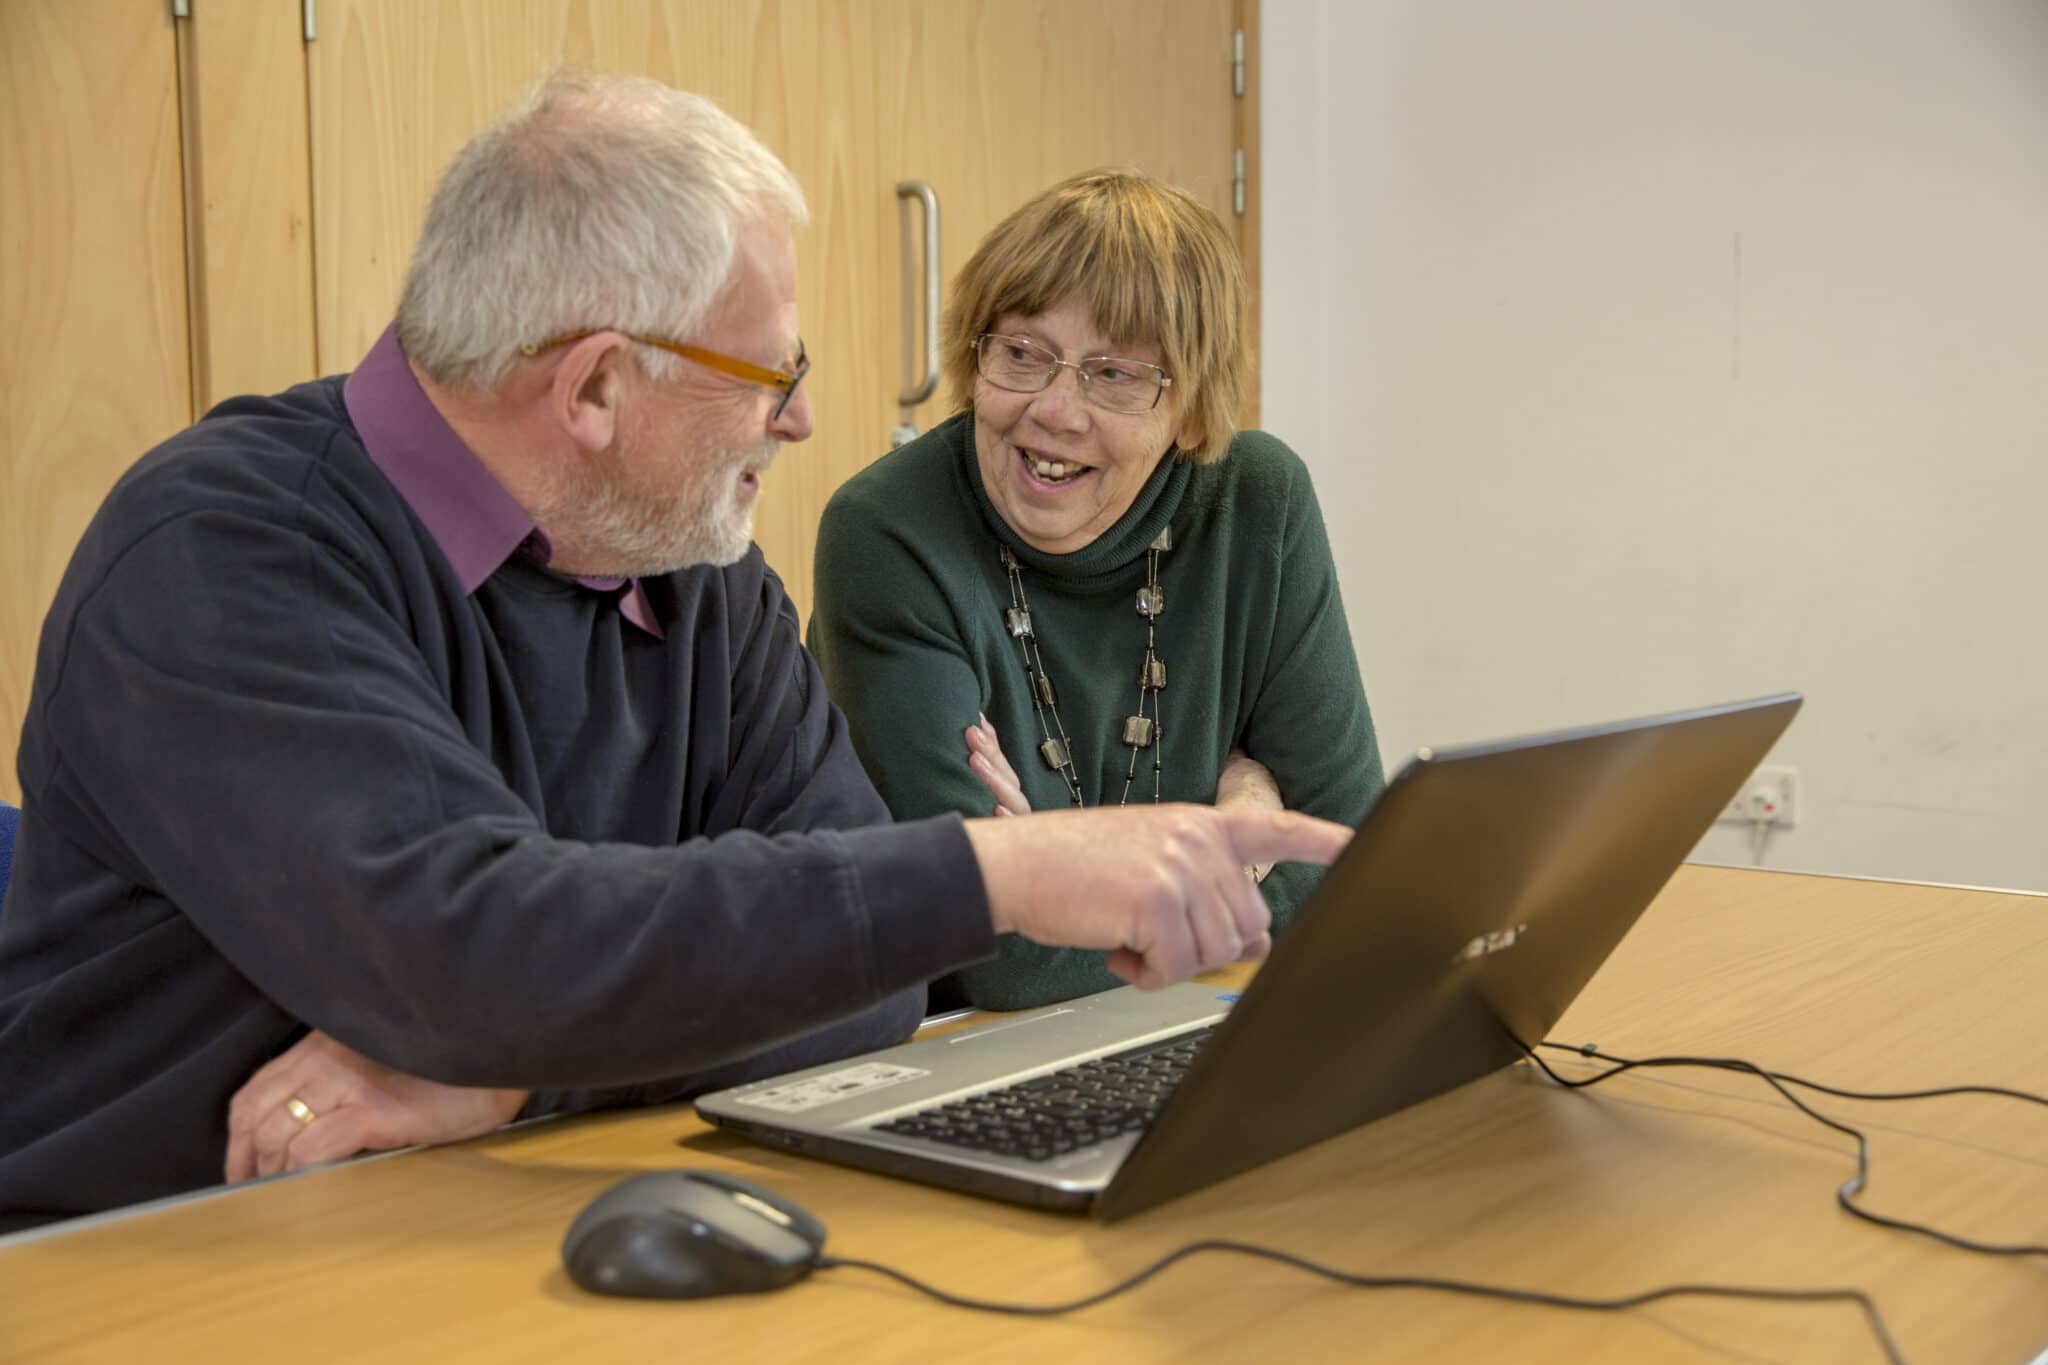 Two people at a laptop, pointing and smiling